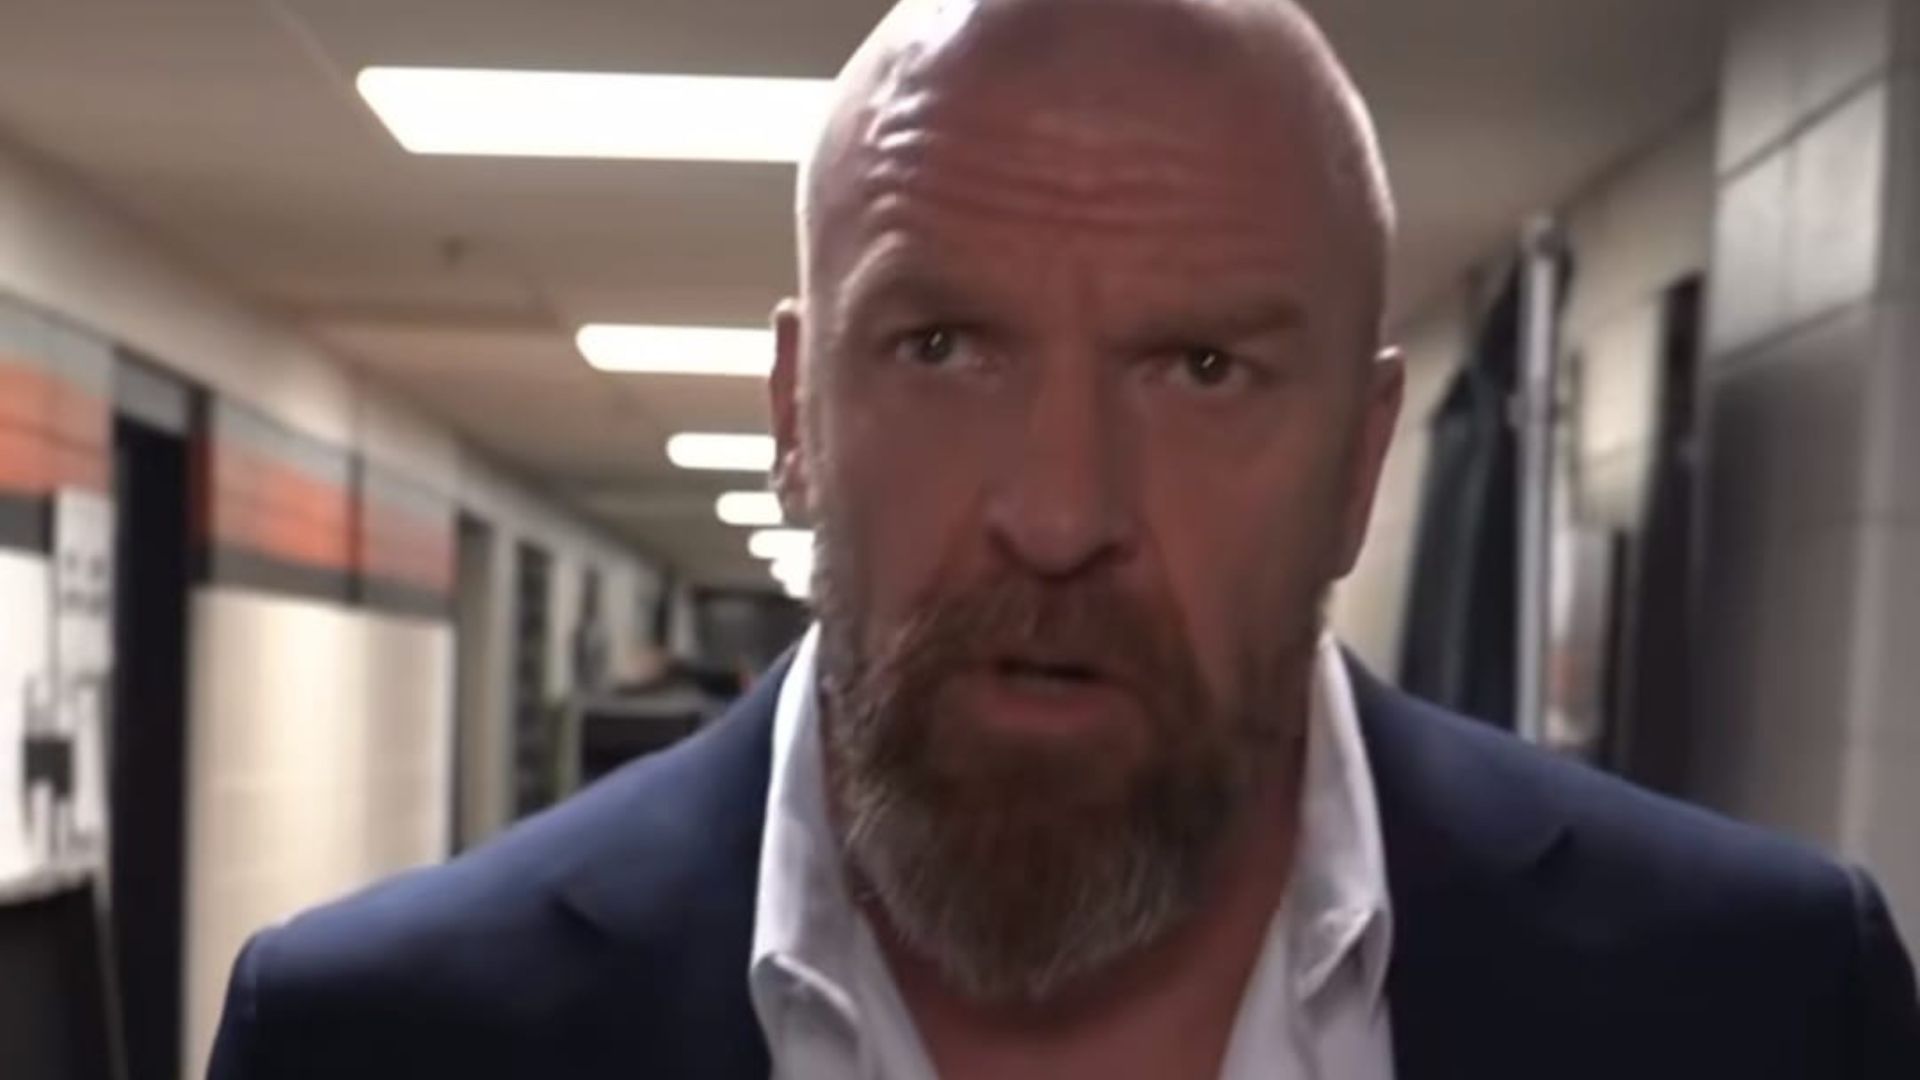 Triple H is one of the most powerful persons in WWE today.